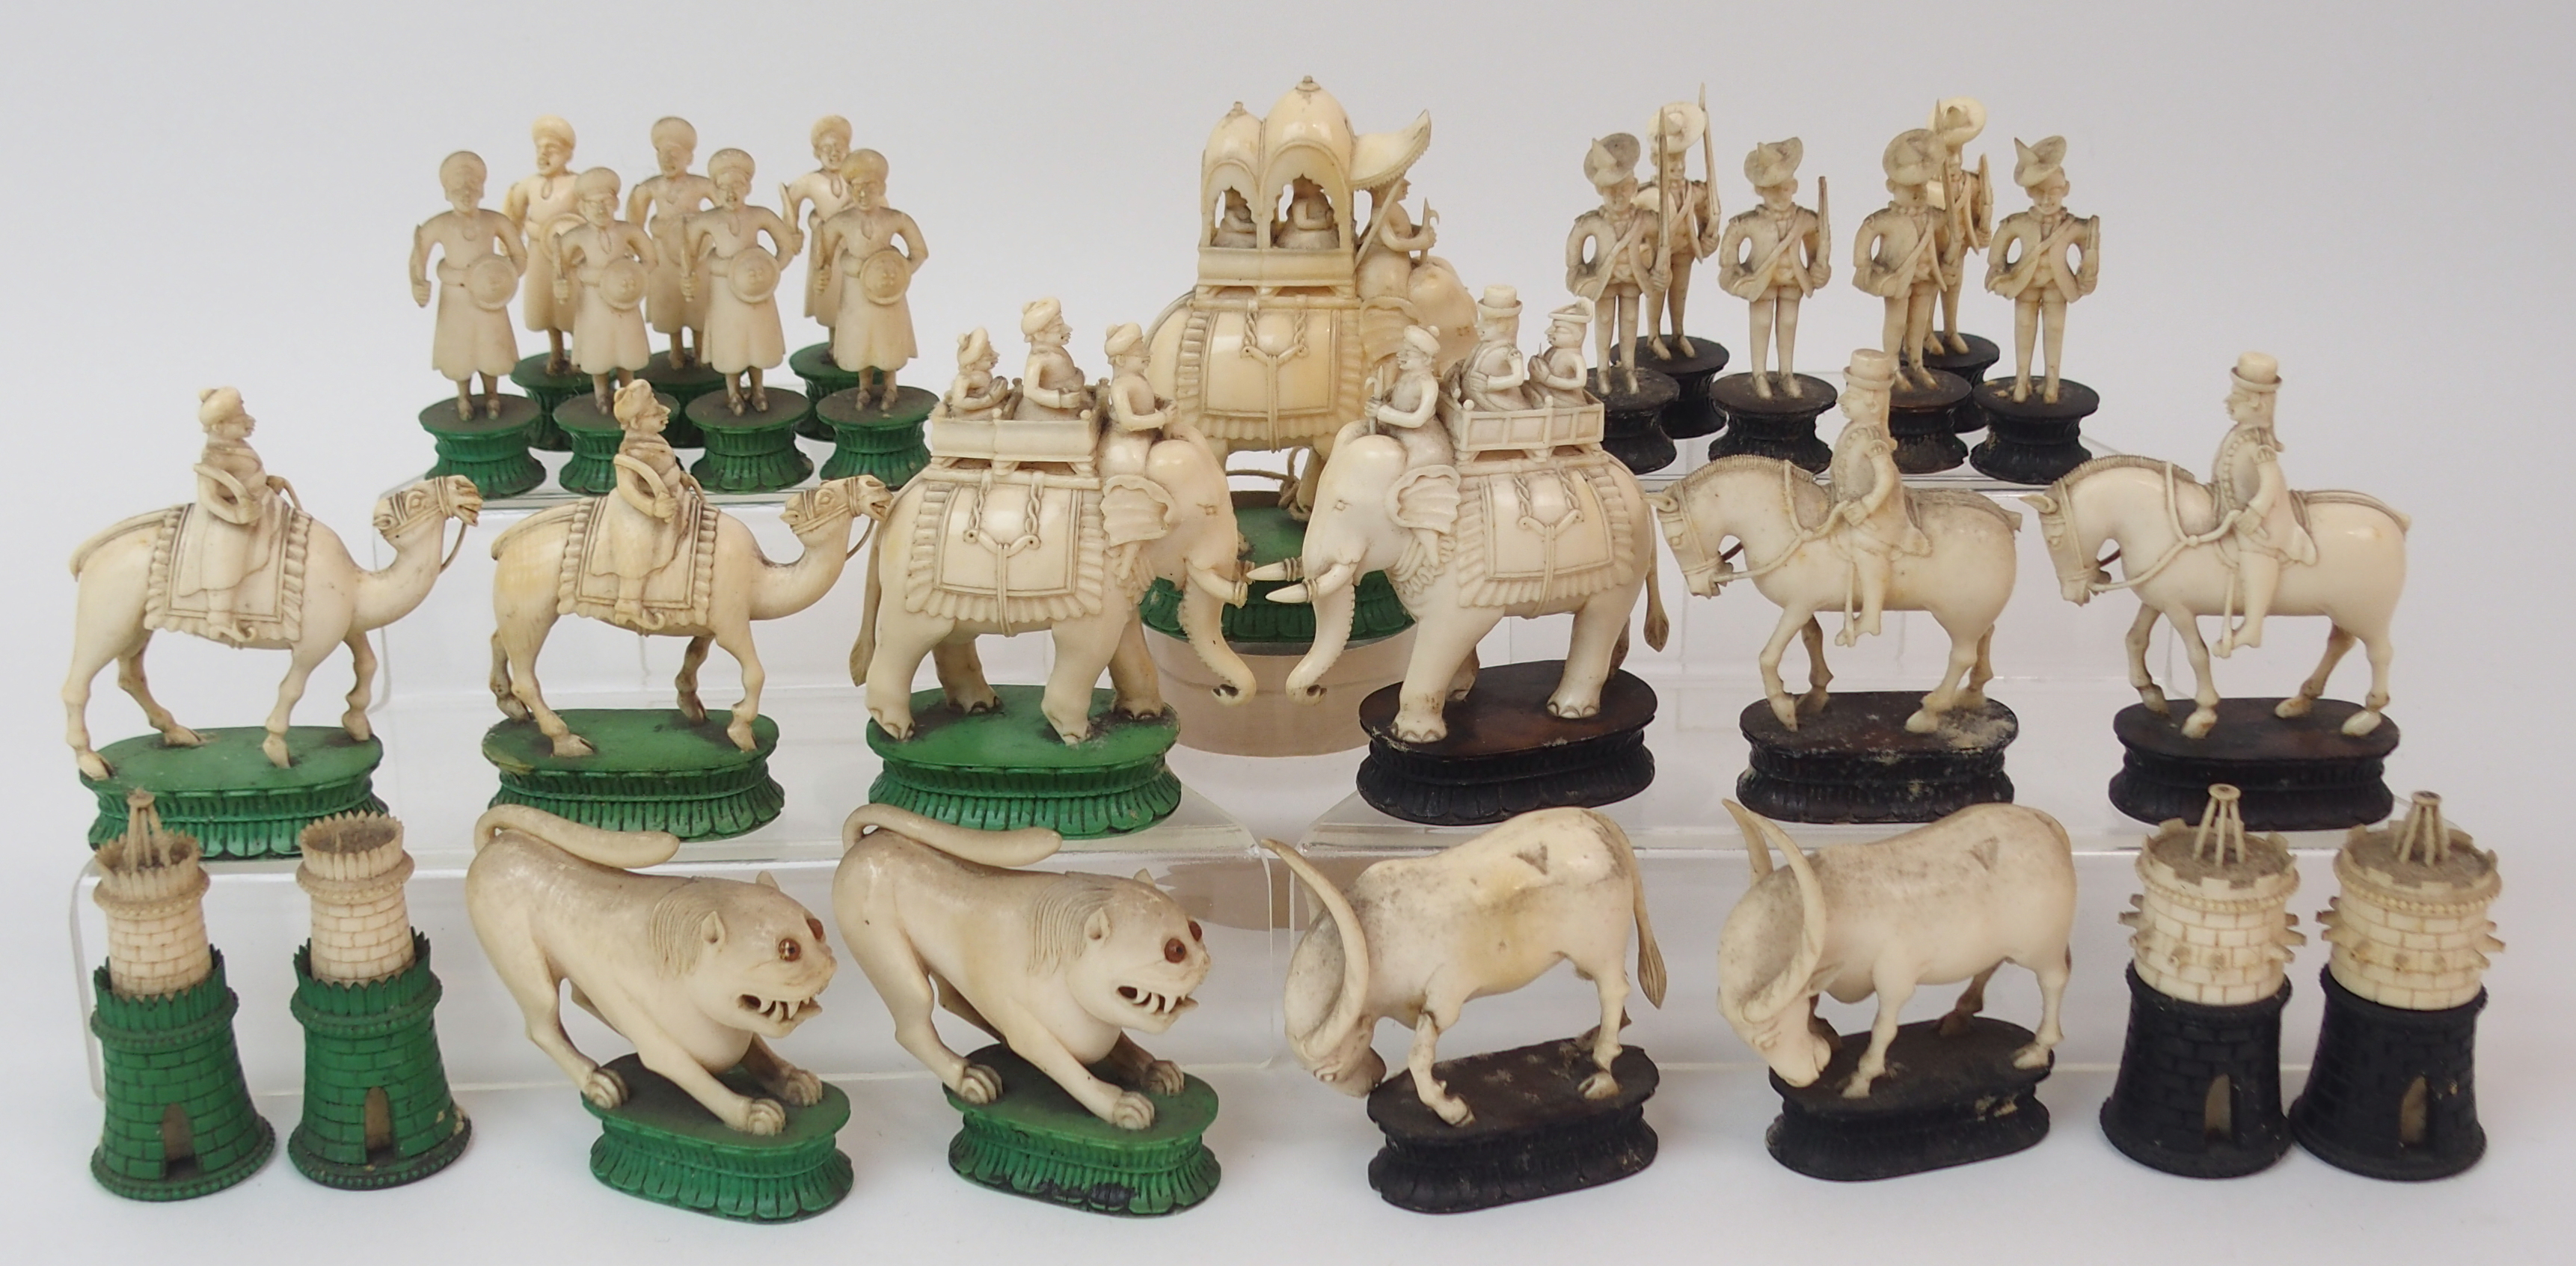 AN EAST INDIAN IVORY CHESS SET probably Berhampore, one set with black stained bases lacking two